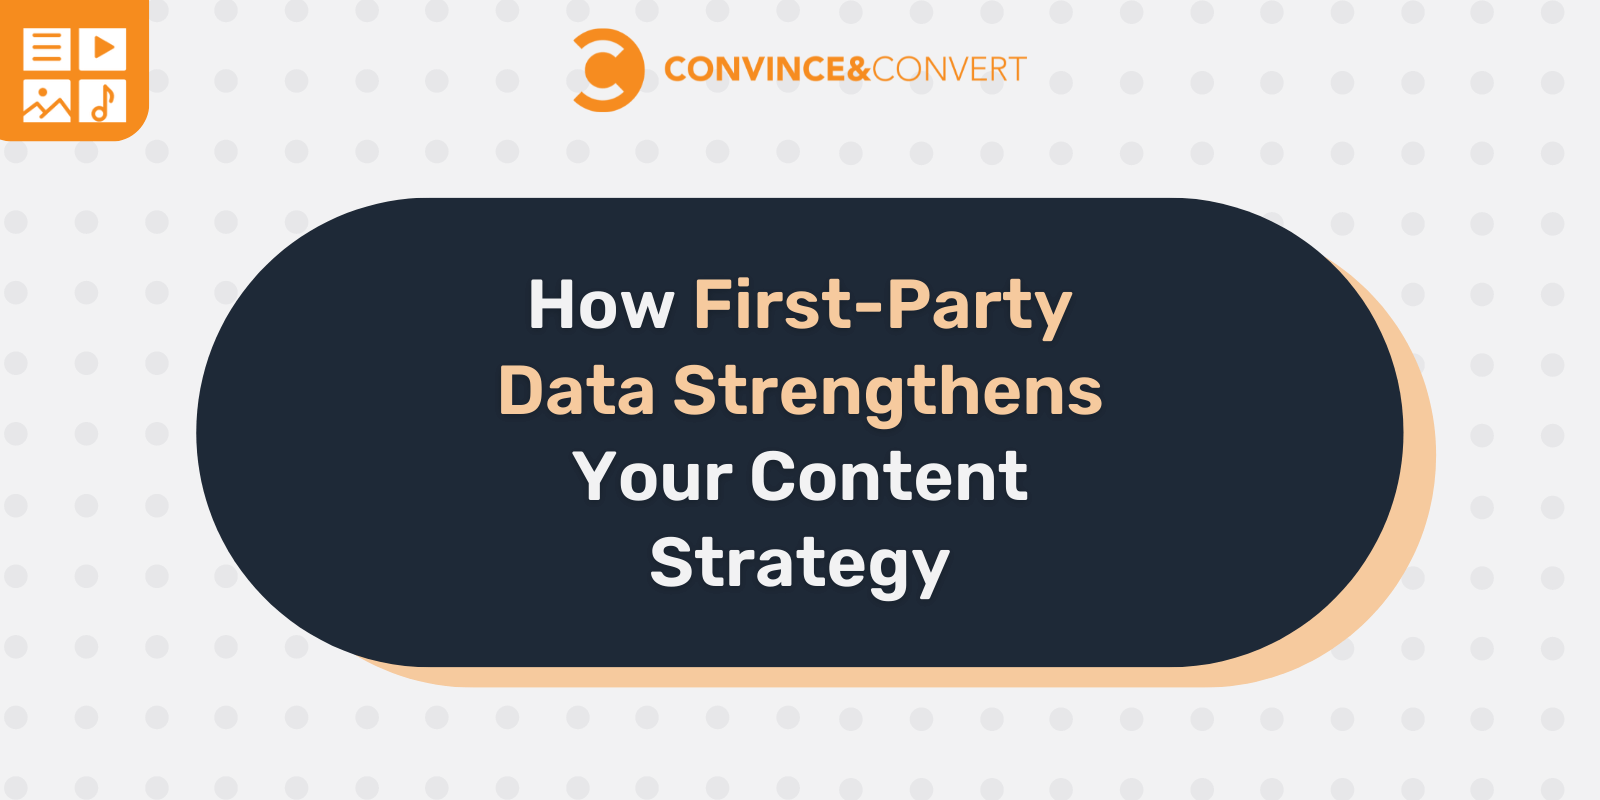 How First-Party Data Strengthens Your Content Strategy